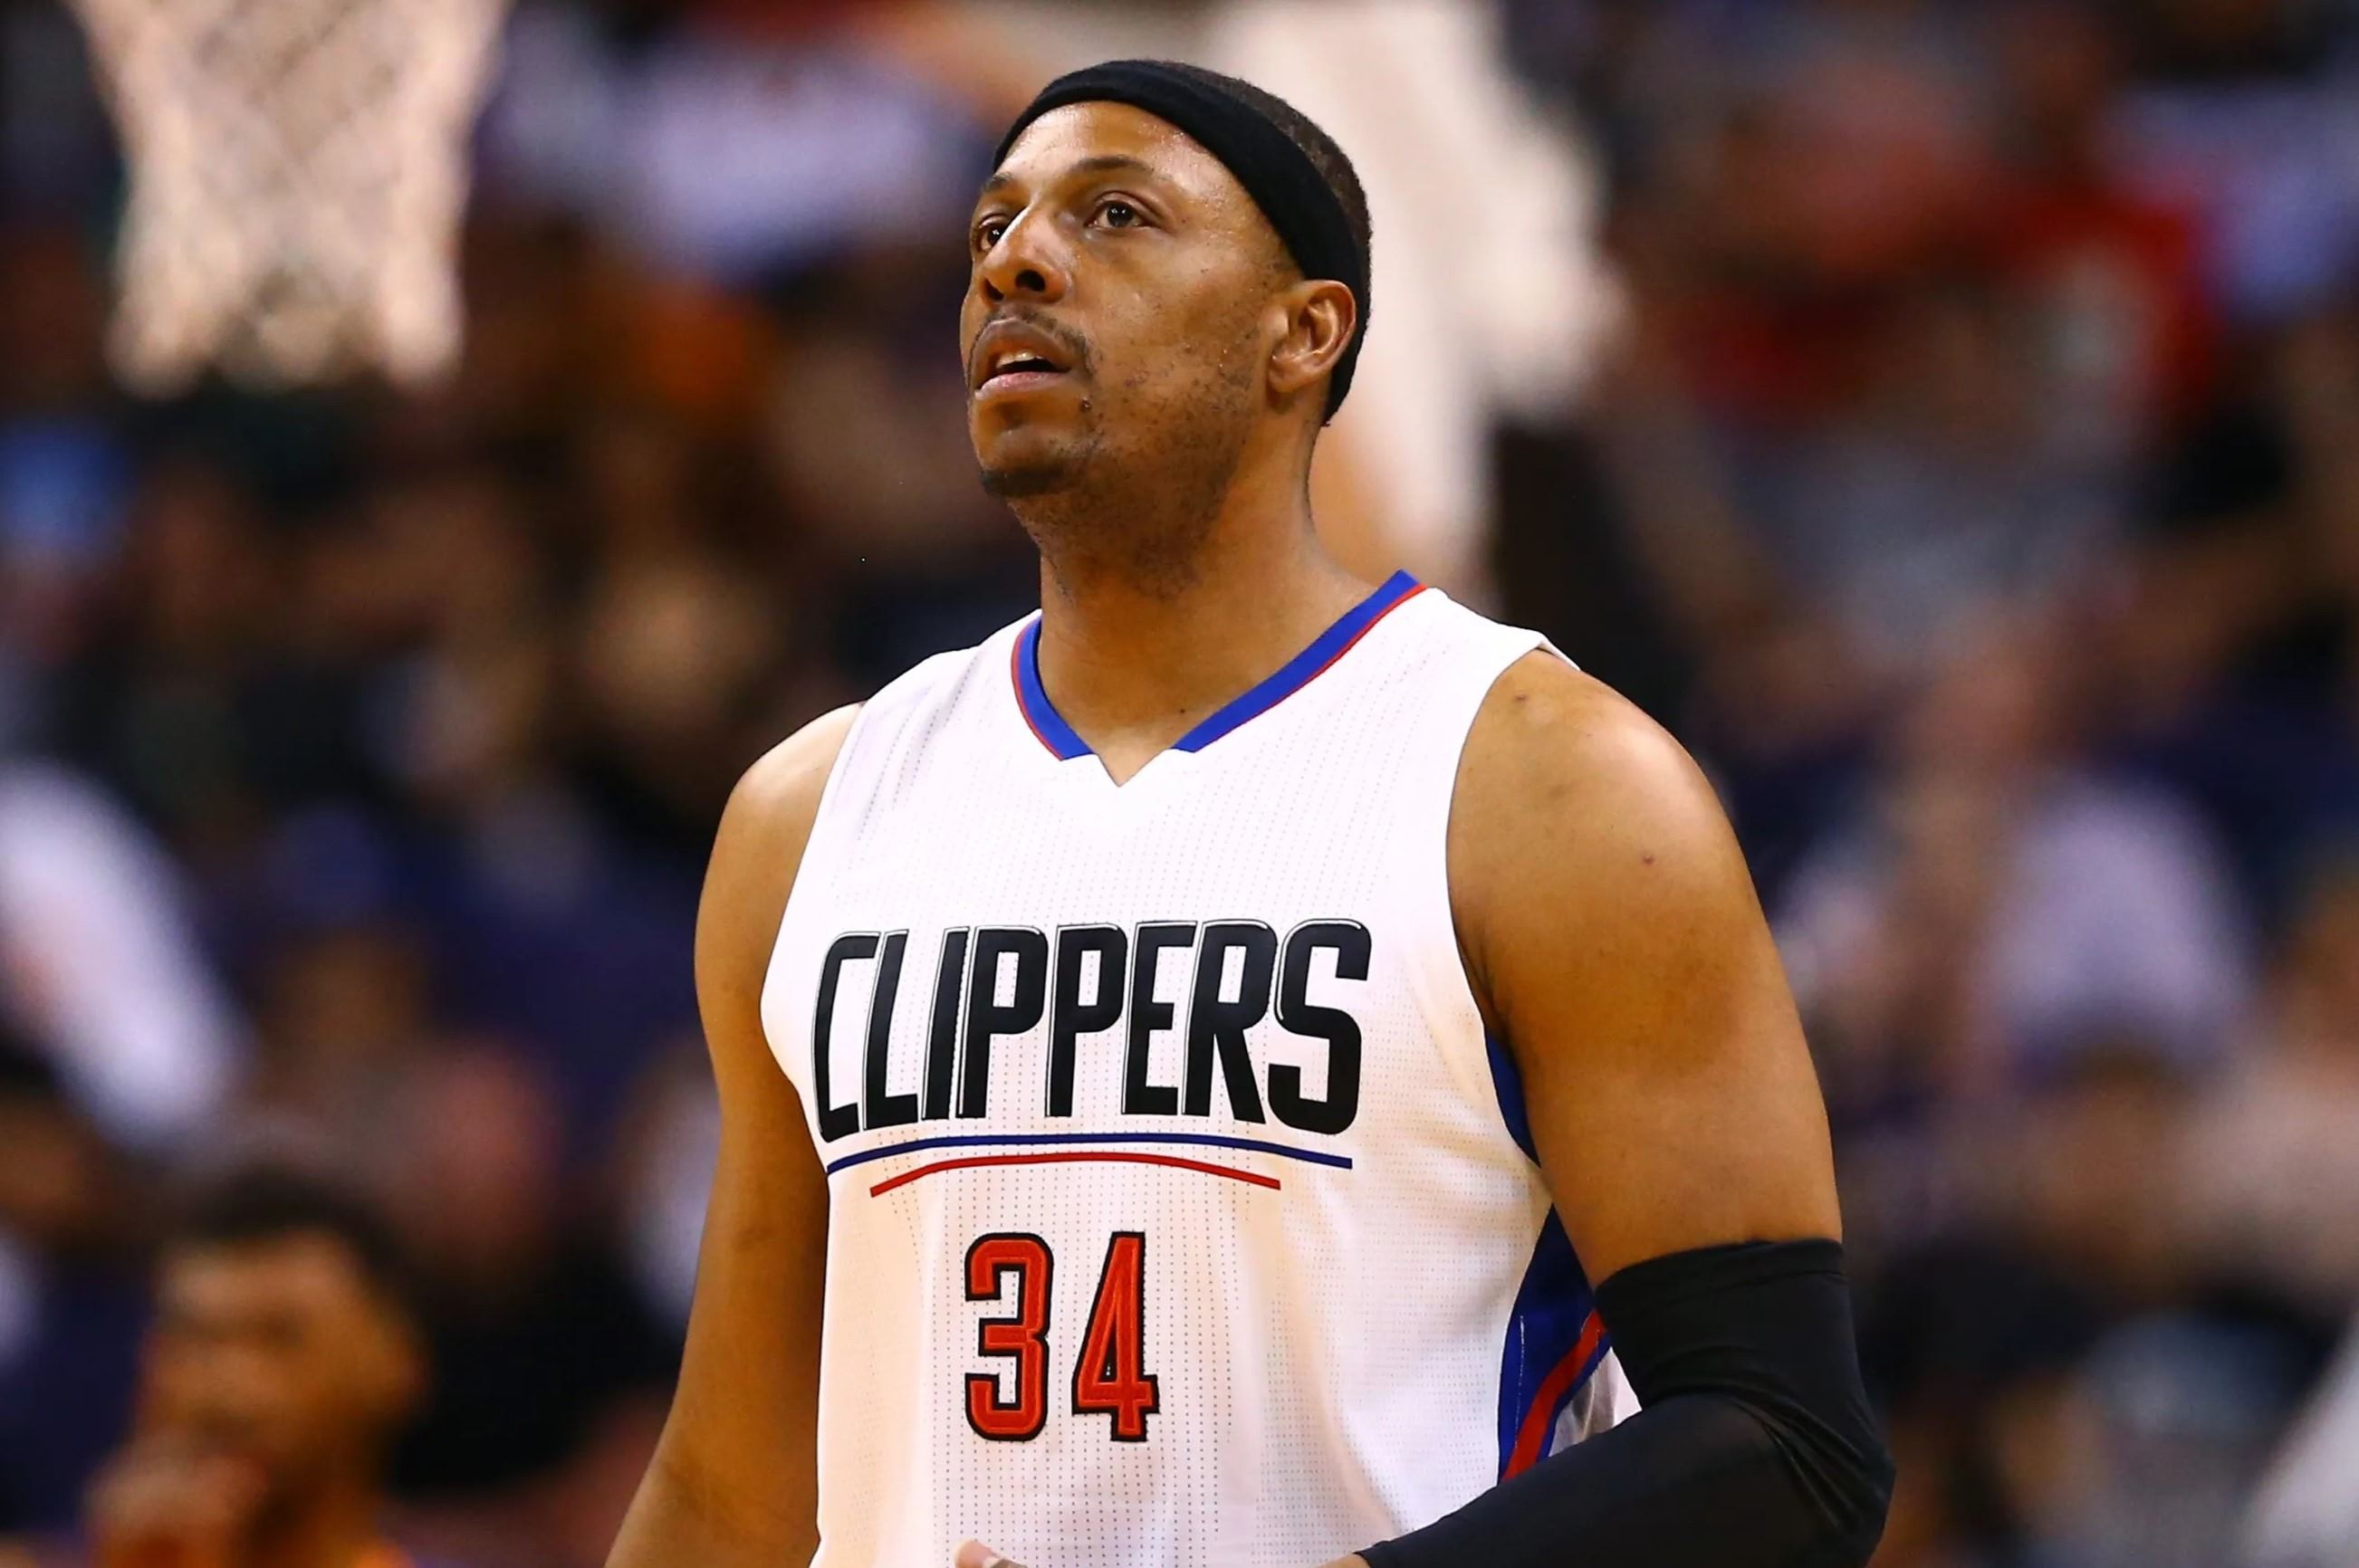 Paul Pierce Talks About Growing Up In Inglewood In New Players